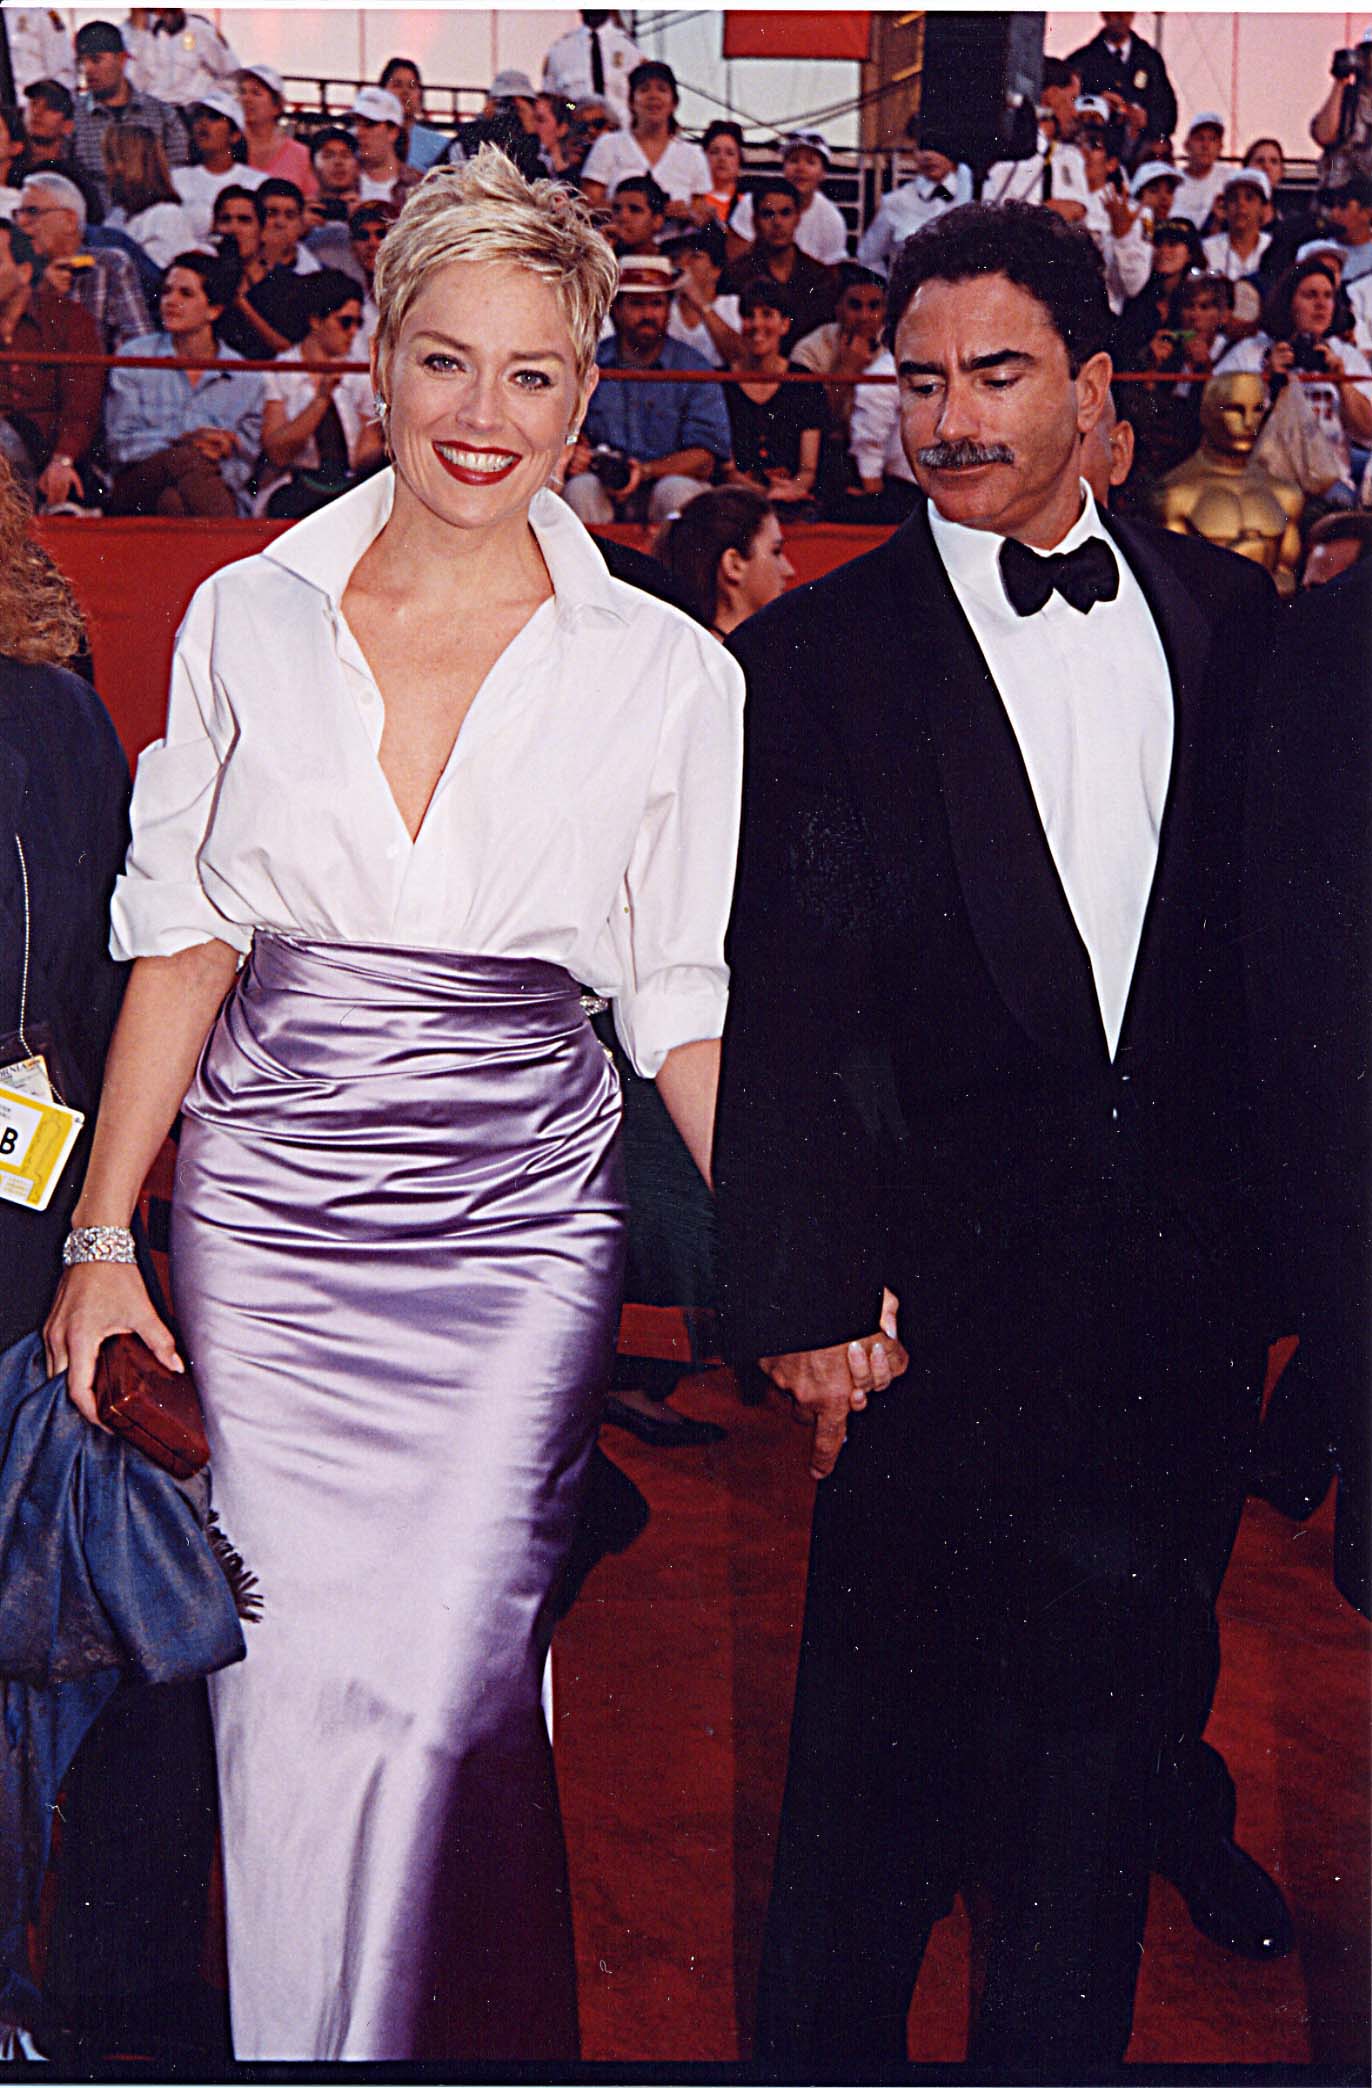 Sharon Stone in Vera Wang Skirt Picture Best Oscar fashion through